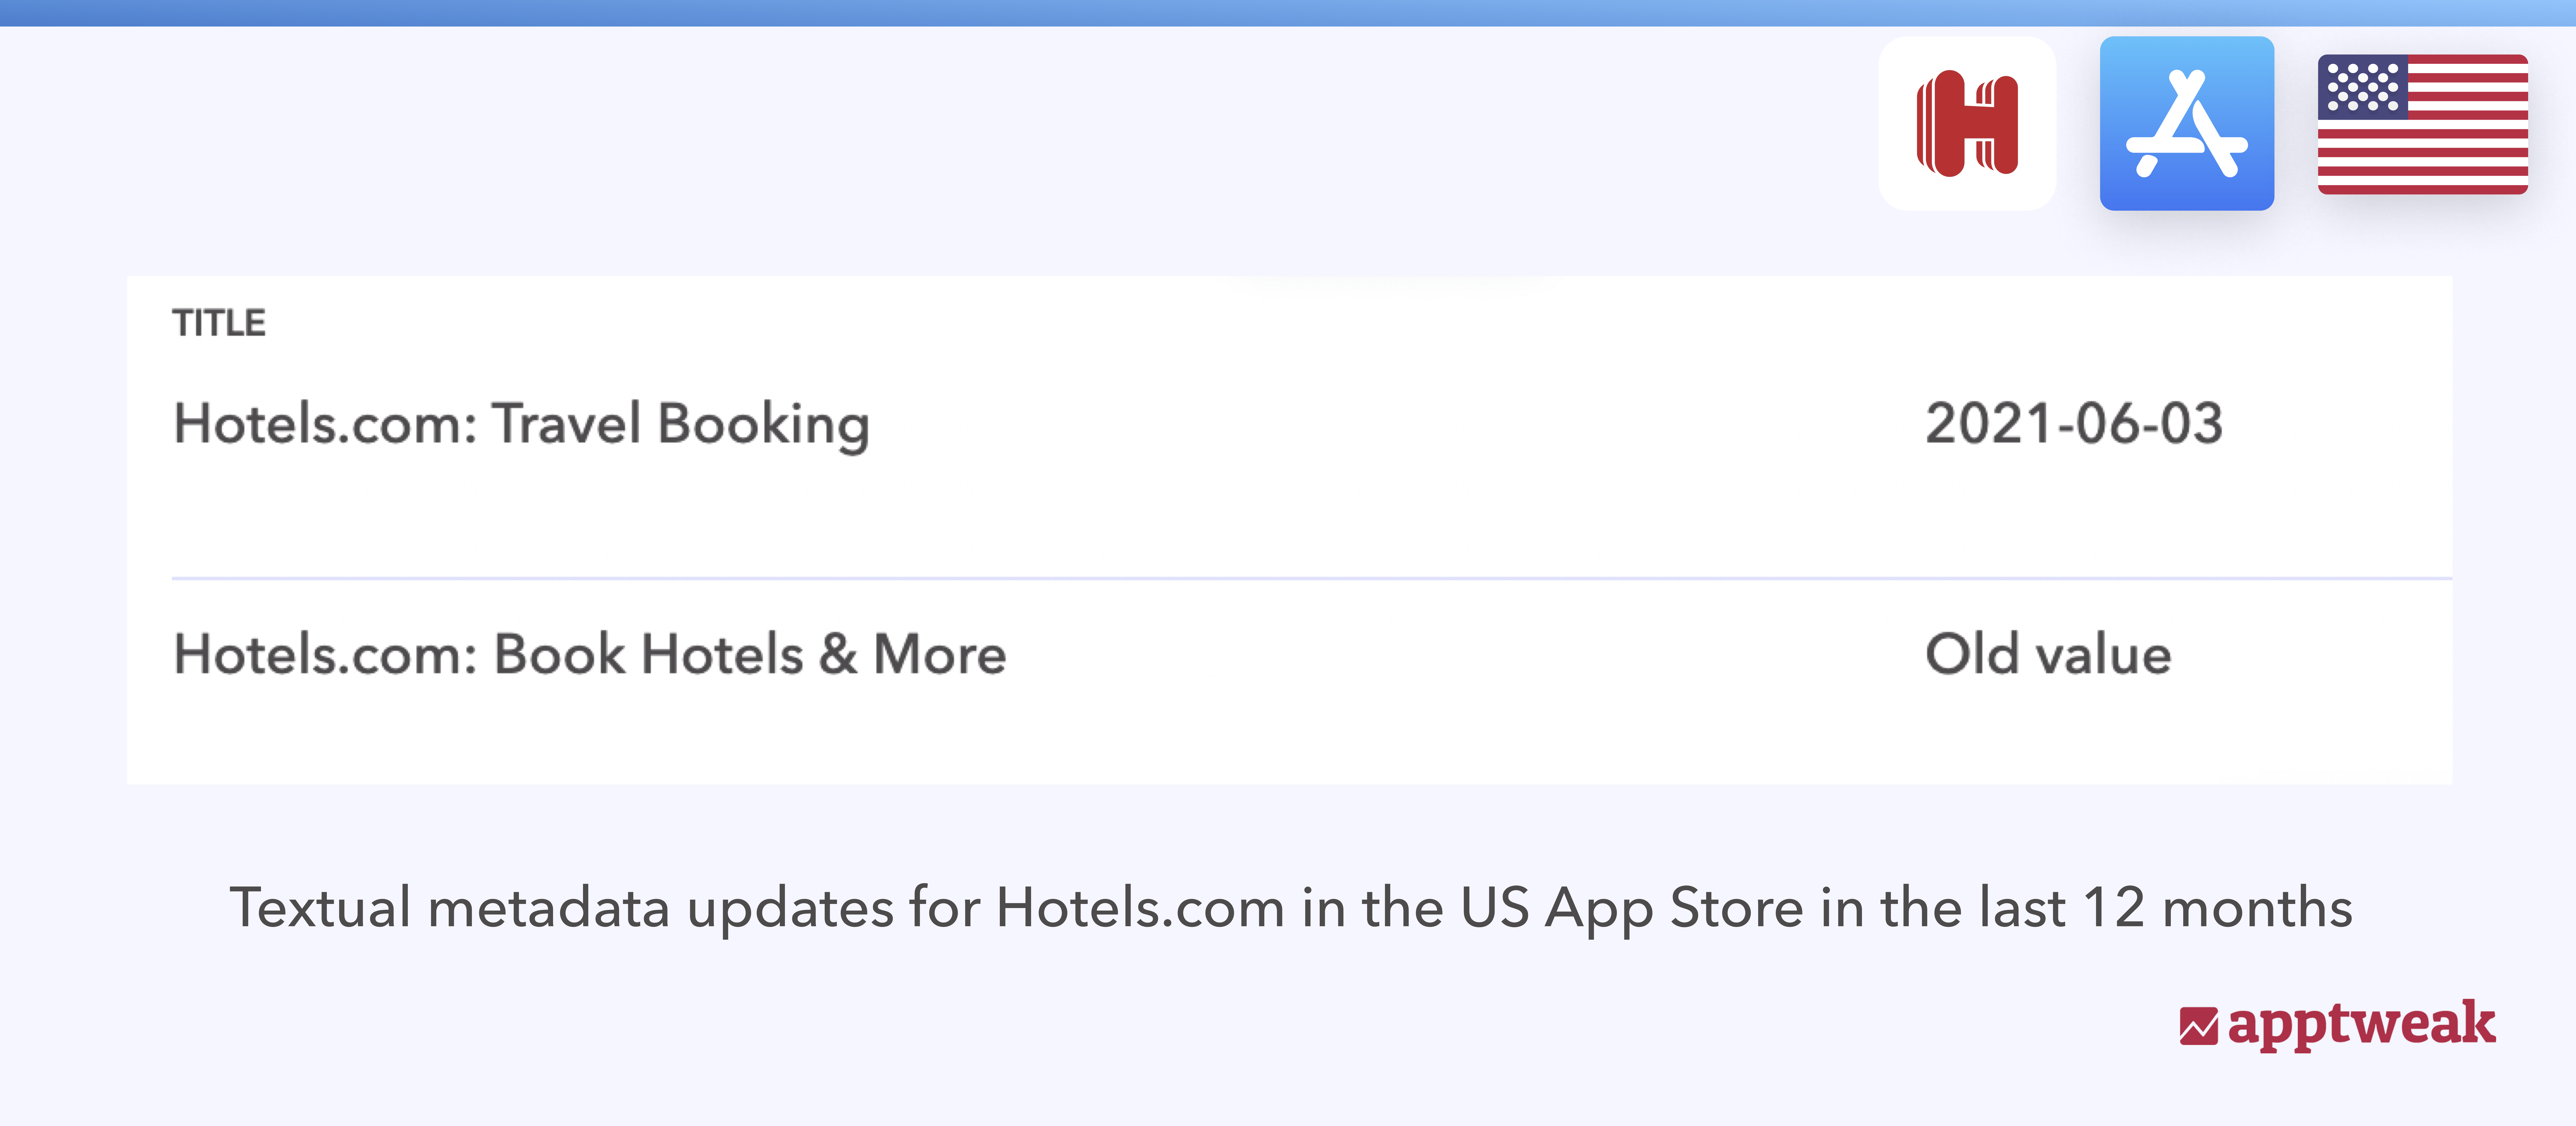 Changes Hotels.com made on its title to include new keywords